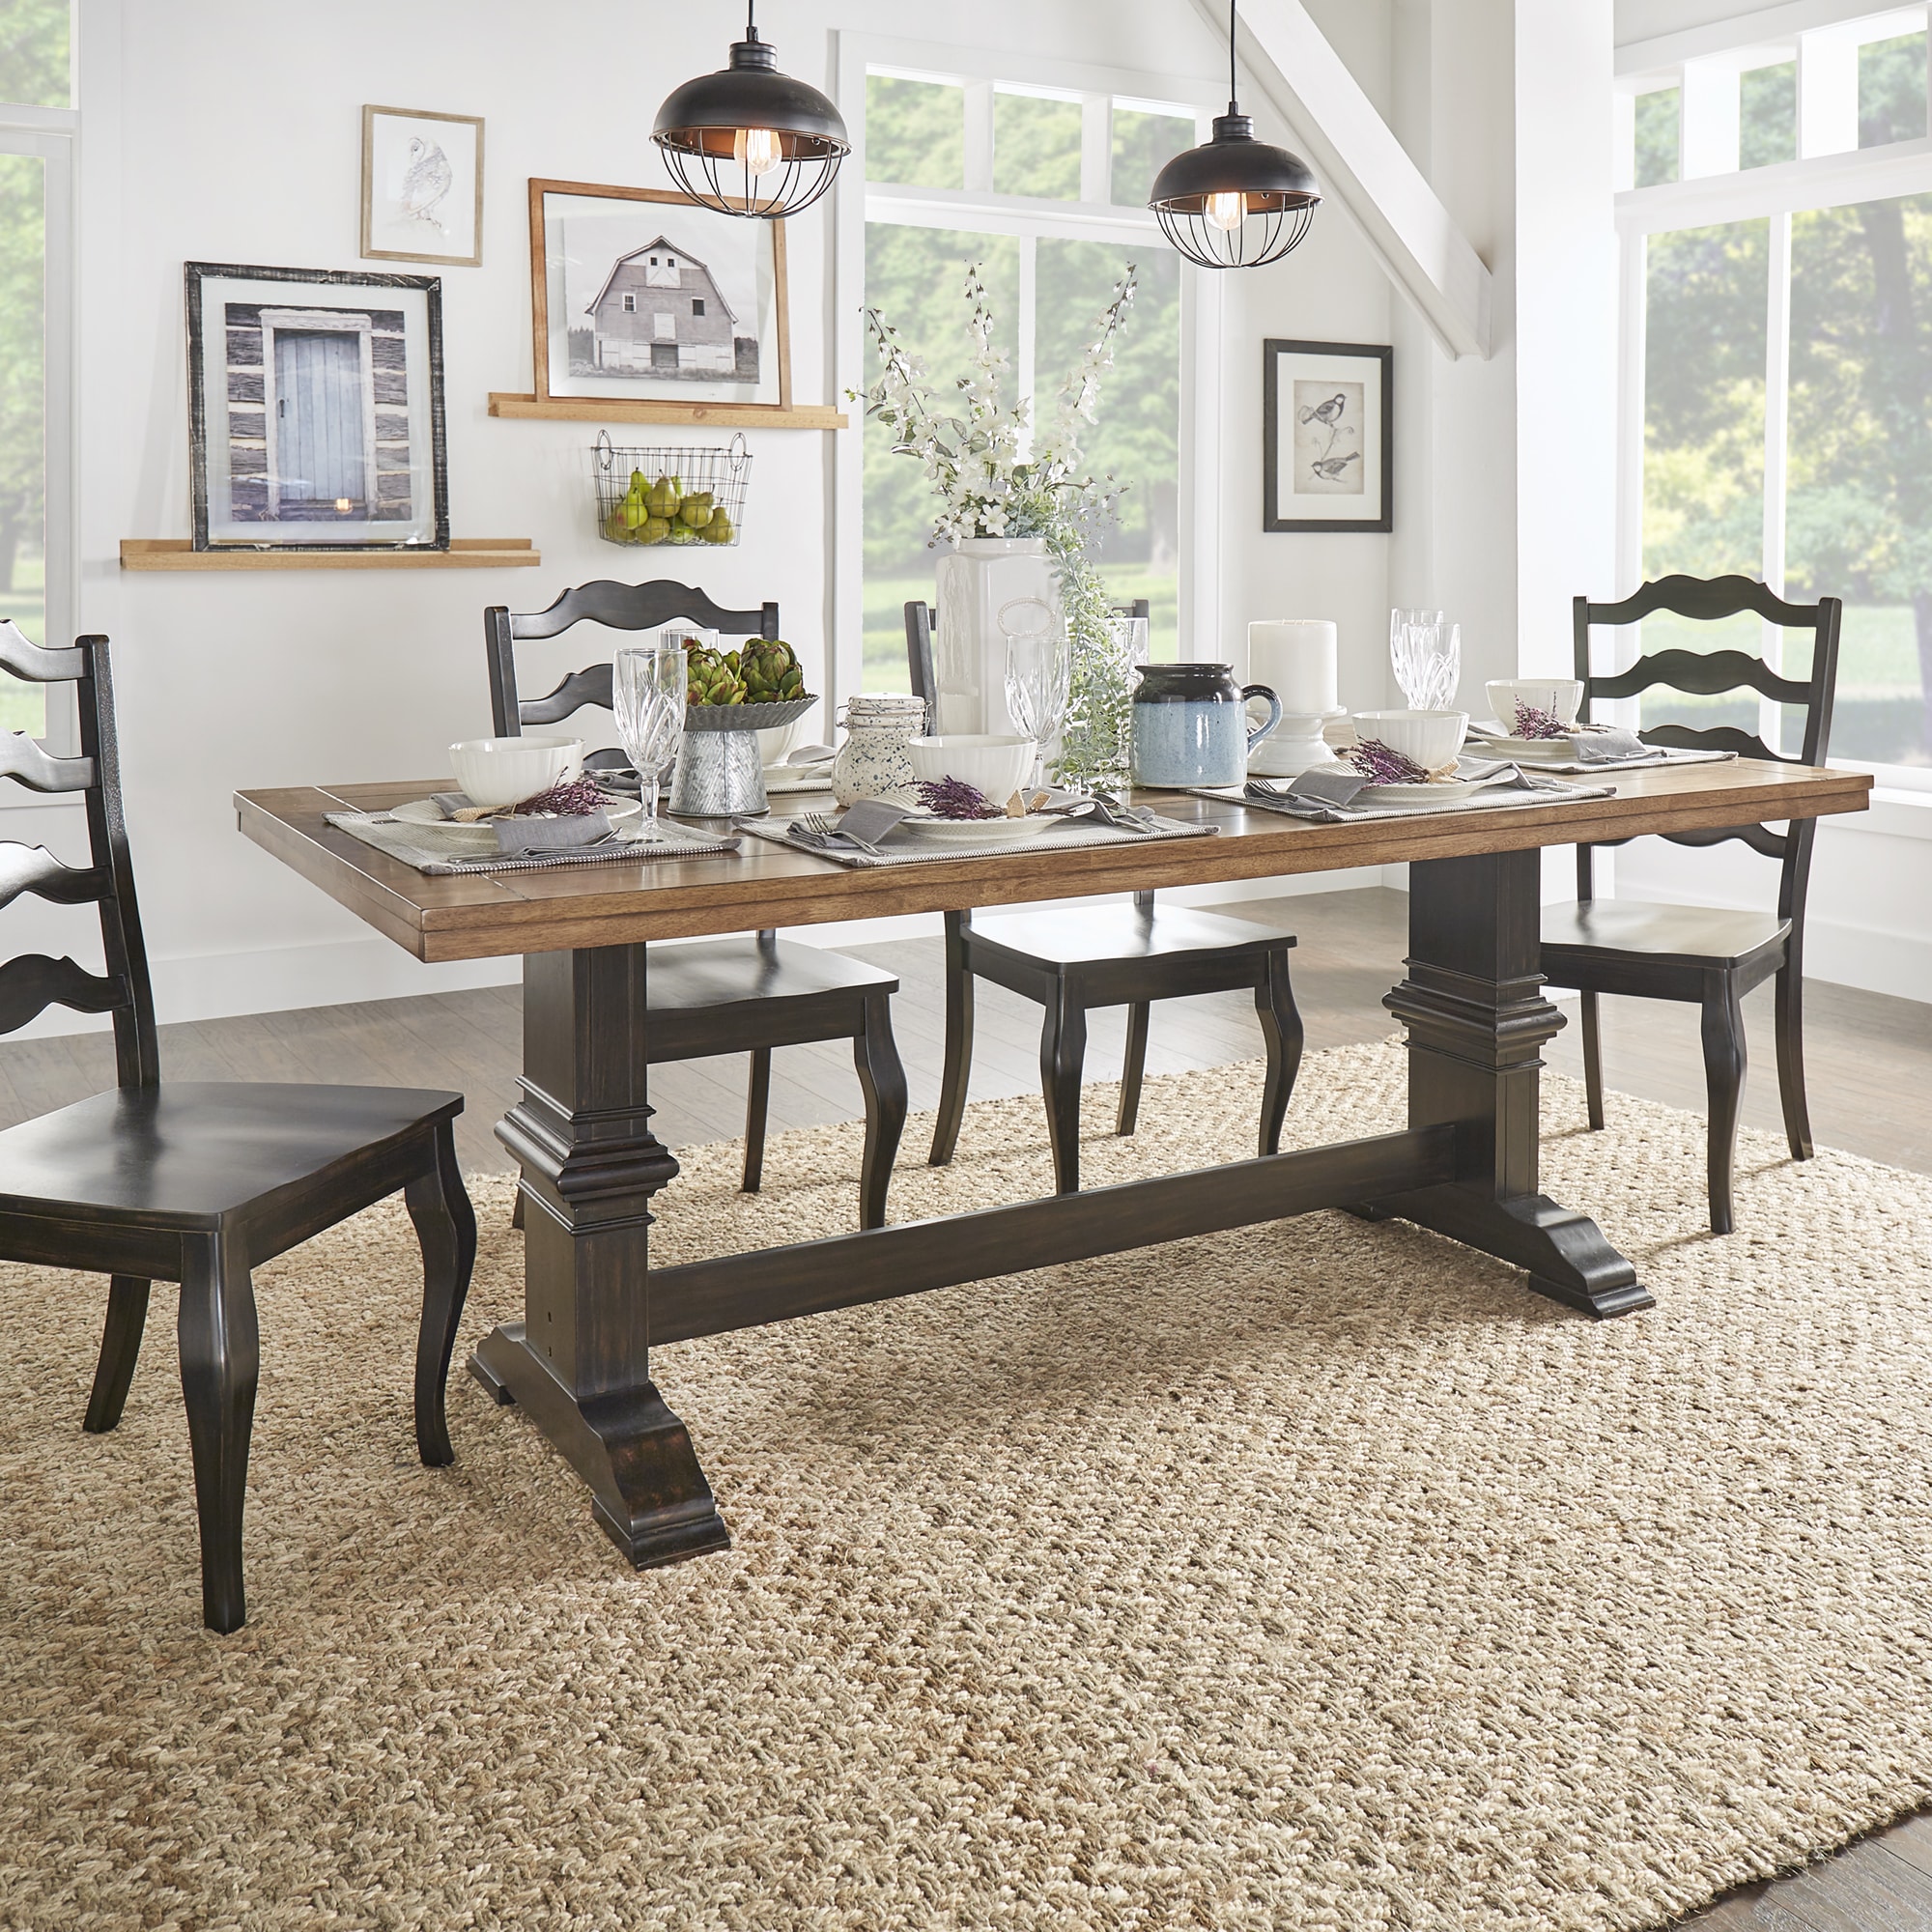 Eleanor Two Tone Rectangular Solid Wood Top Dining Table By INSPIRE Q Classic 5748c8ba 7471 47da Bfec D38a24316f86 